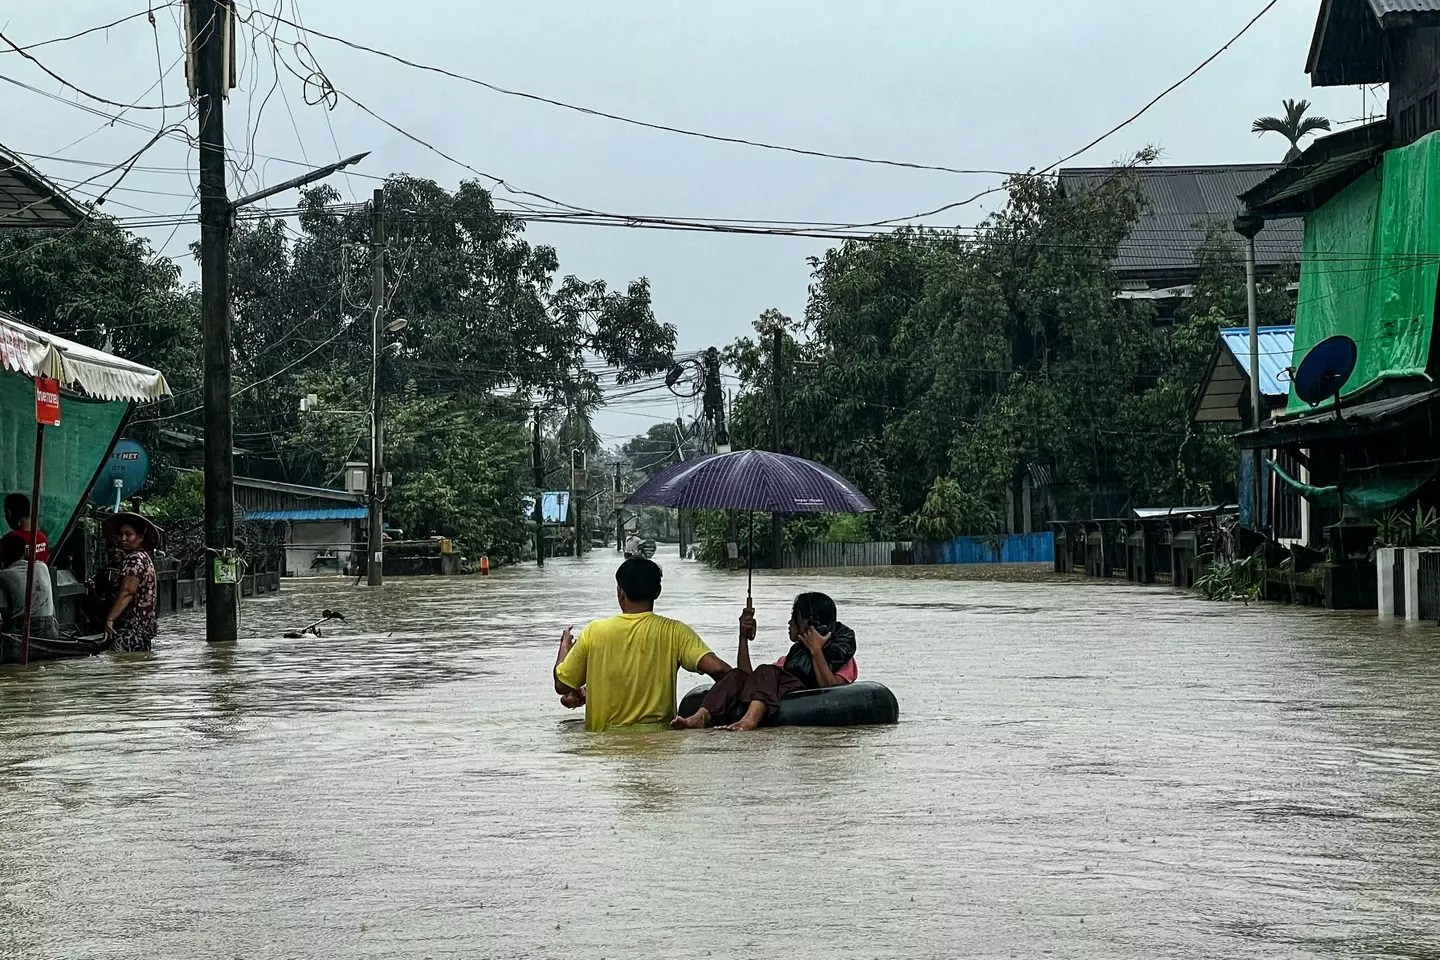 Southern Myanmar is currently experiencing extreme flooding.